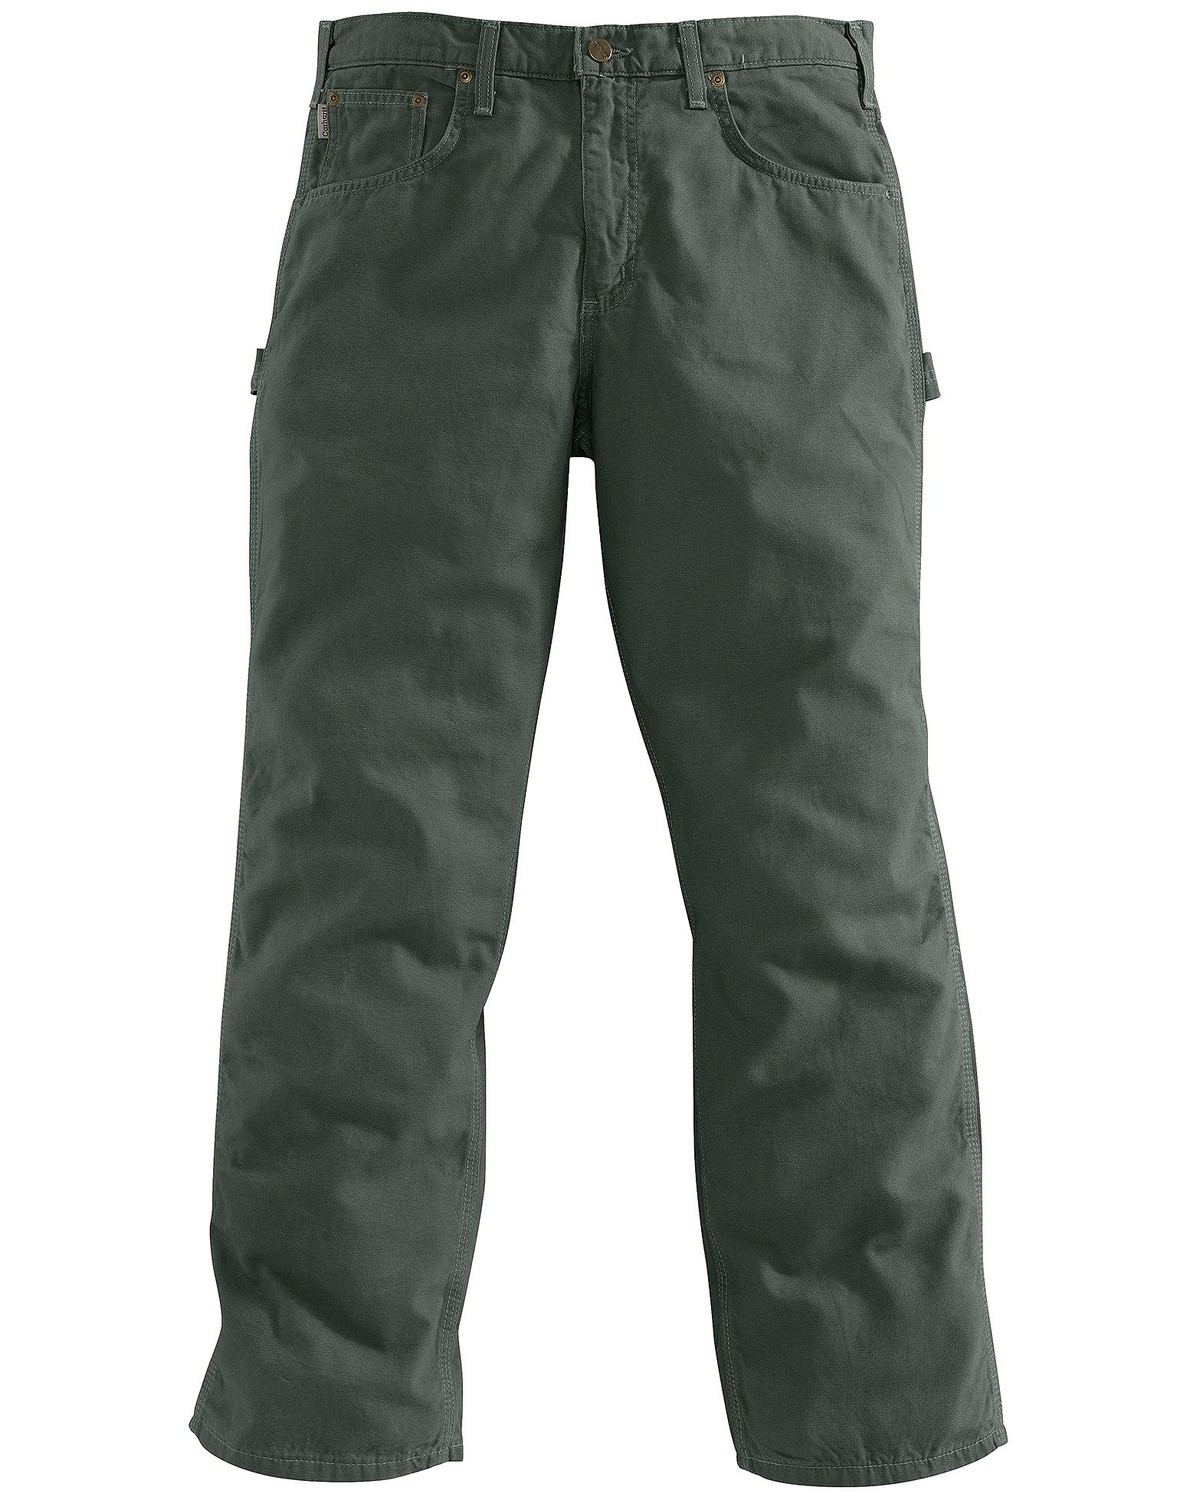 Carhartt Loose Fit Canvas Carpenter Five Pocket Work Pants - Country ...